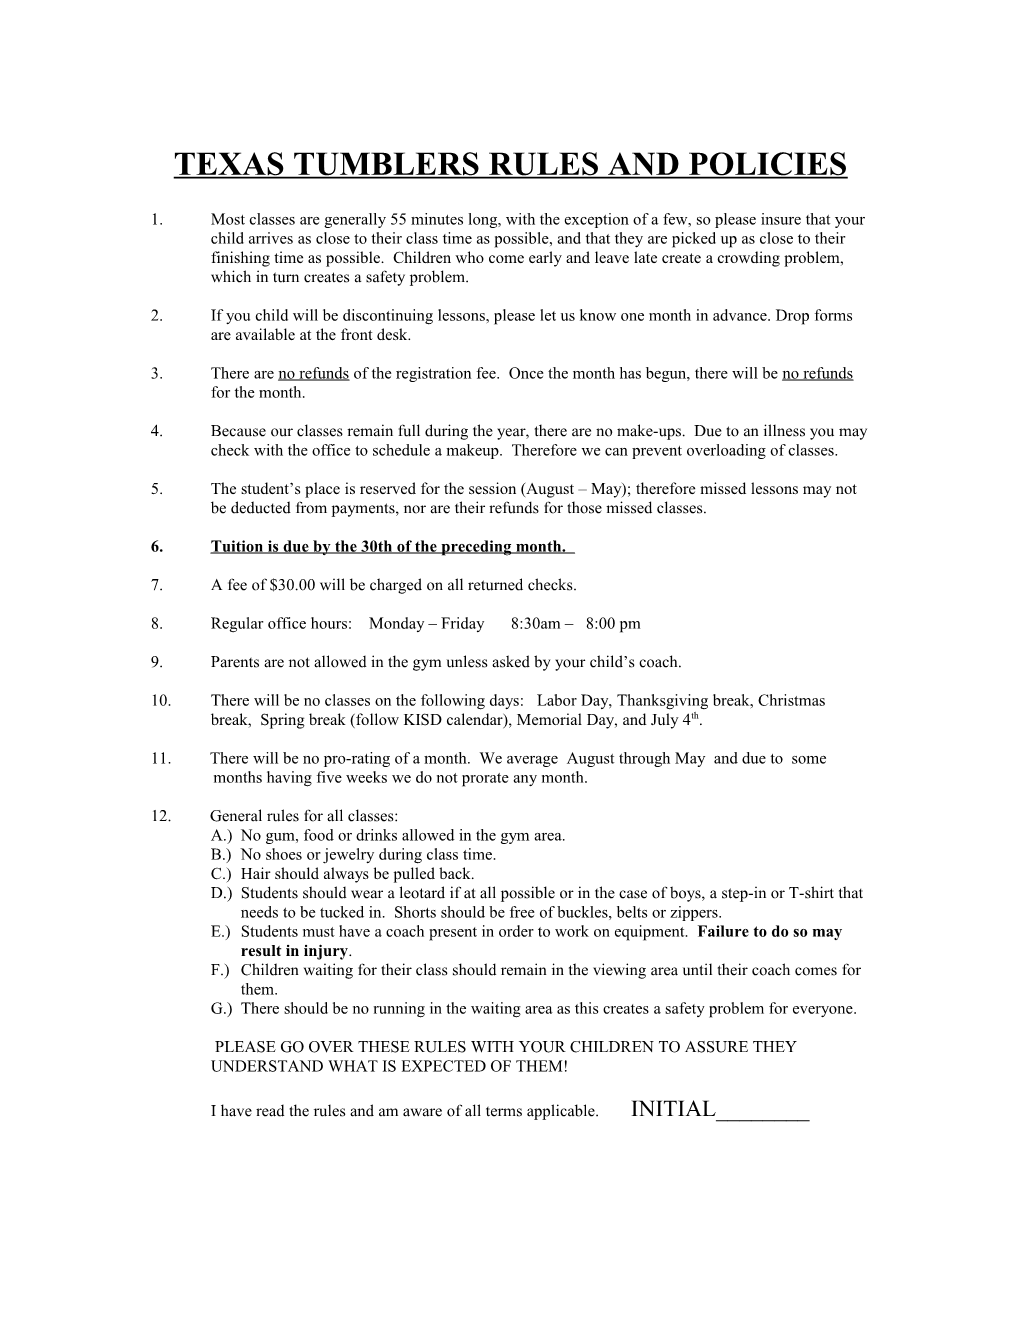 Texas Tumblers Rules and Policies